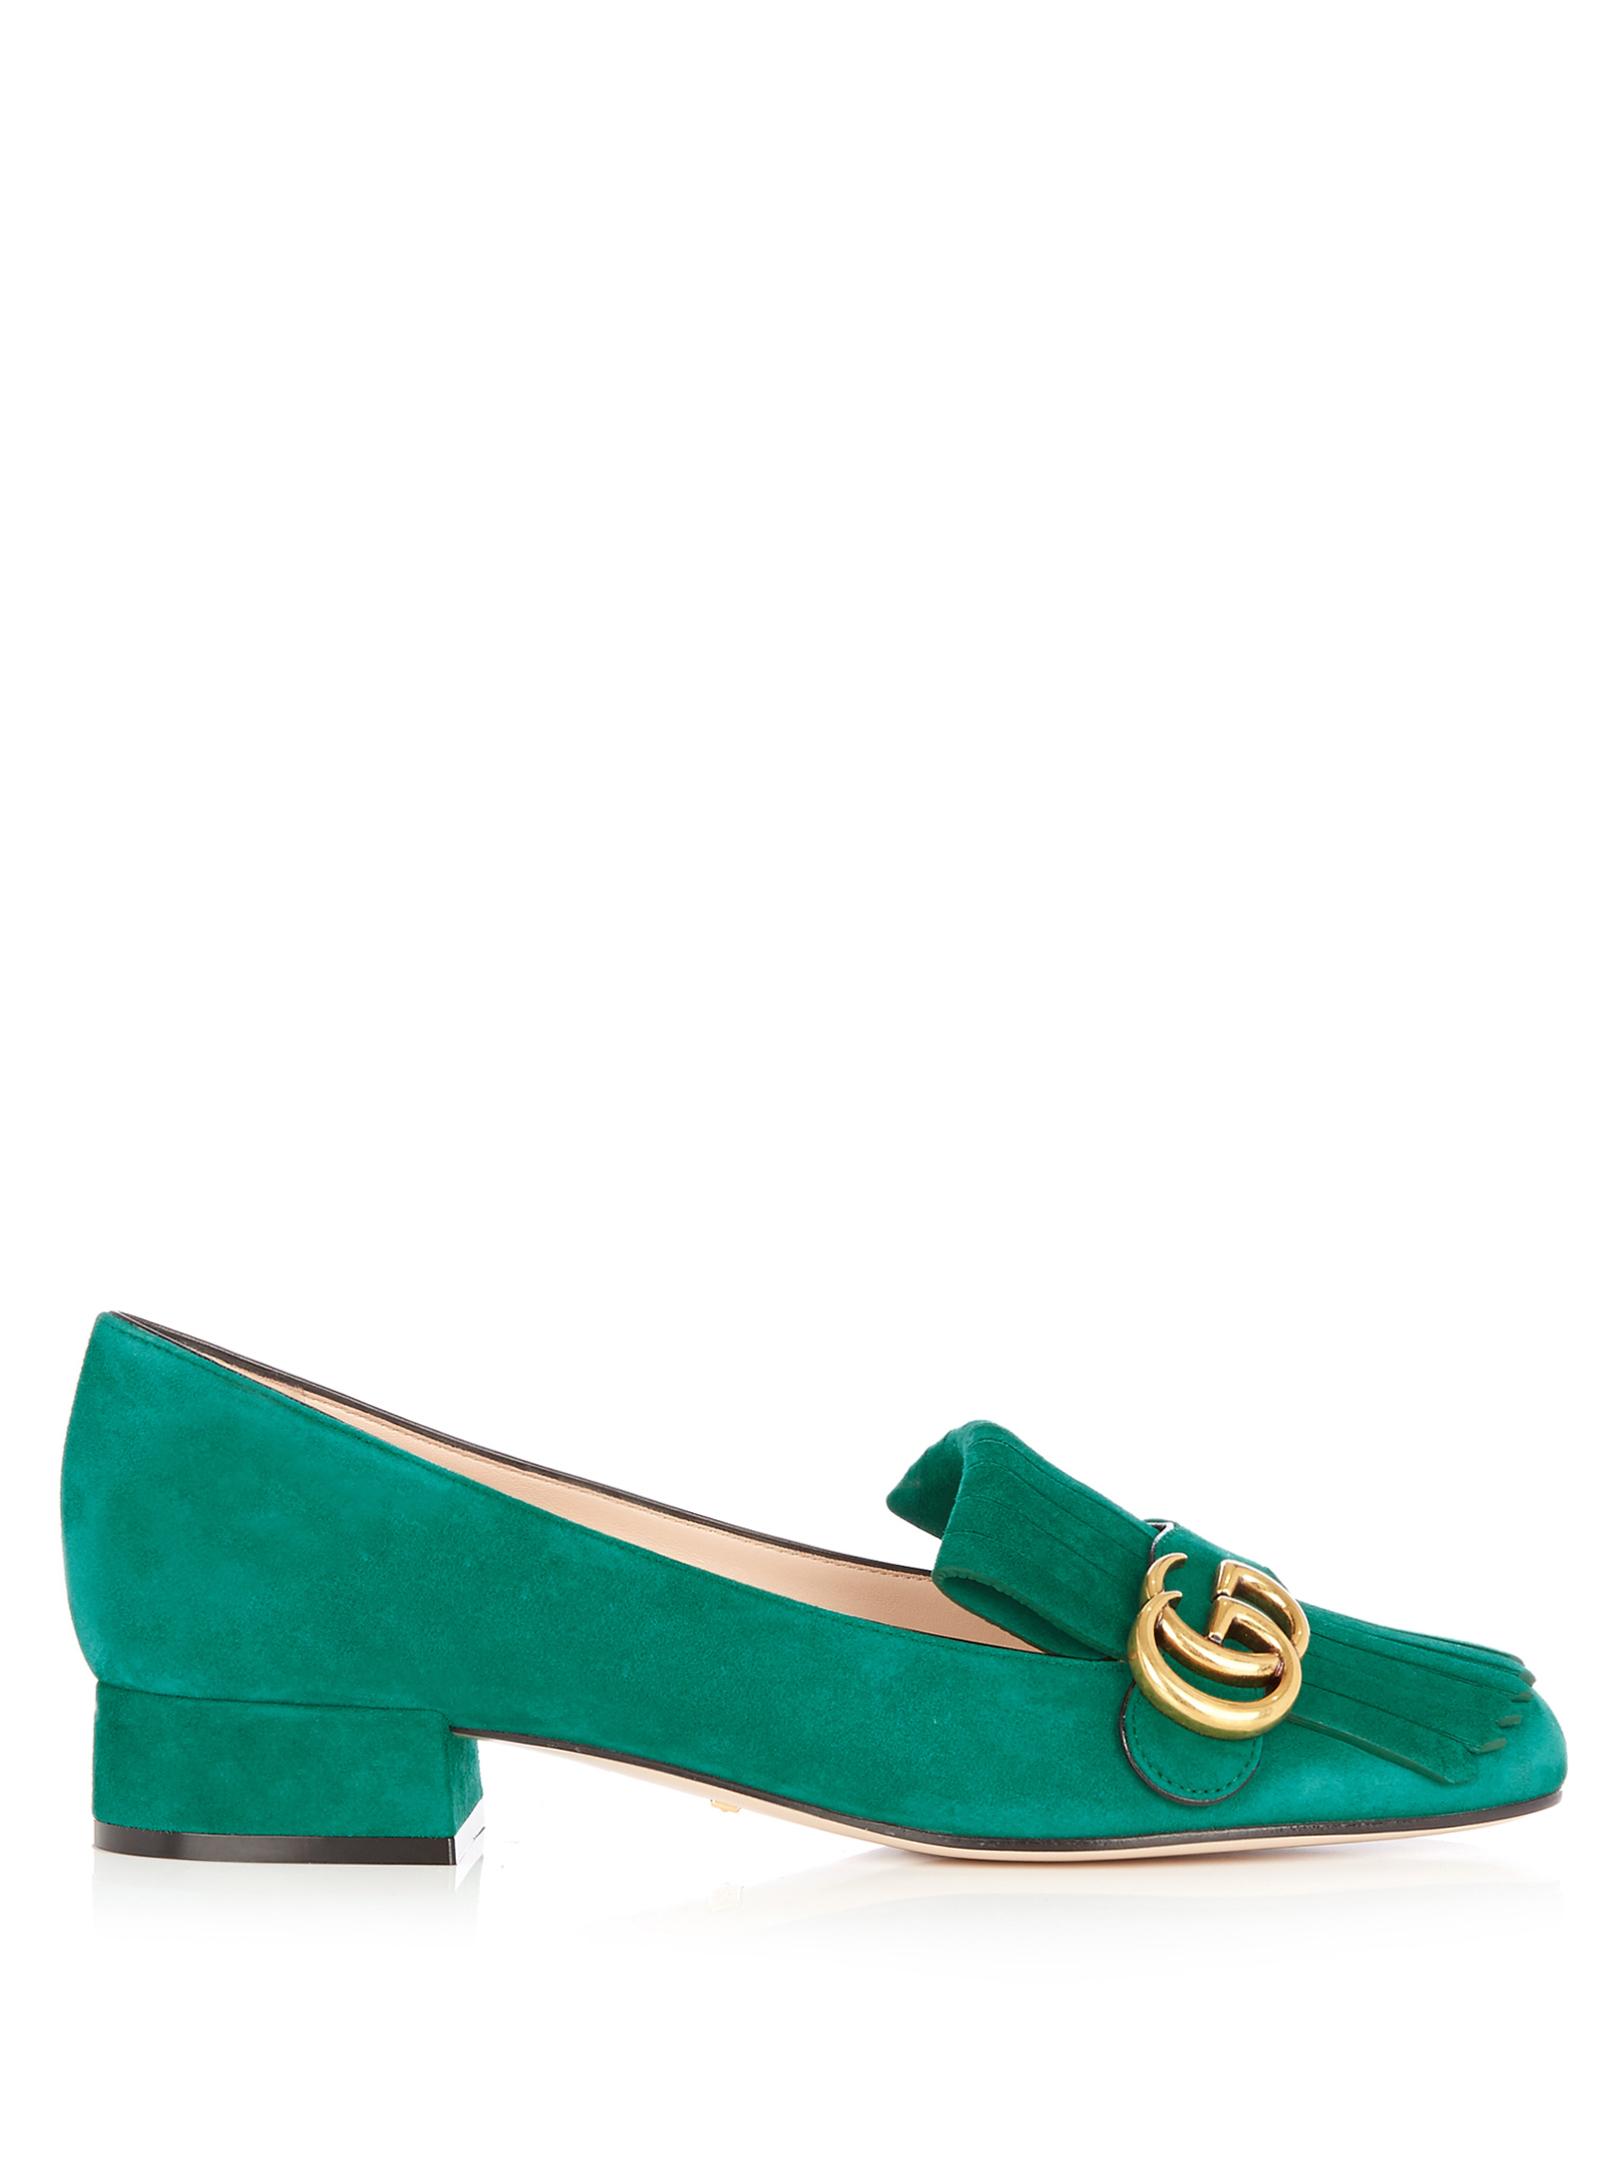 Lyst - Gucci Marmont Fringed Suede Loafers in Green